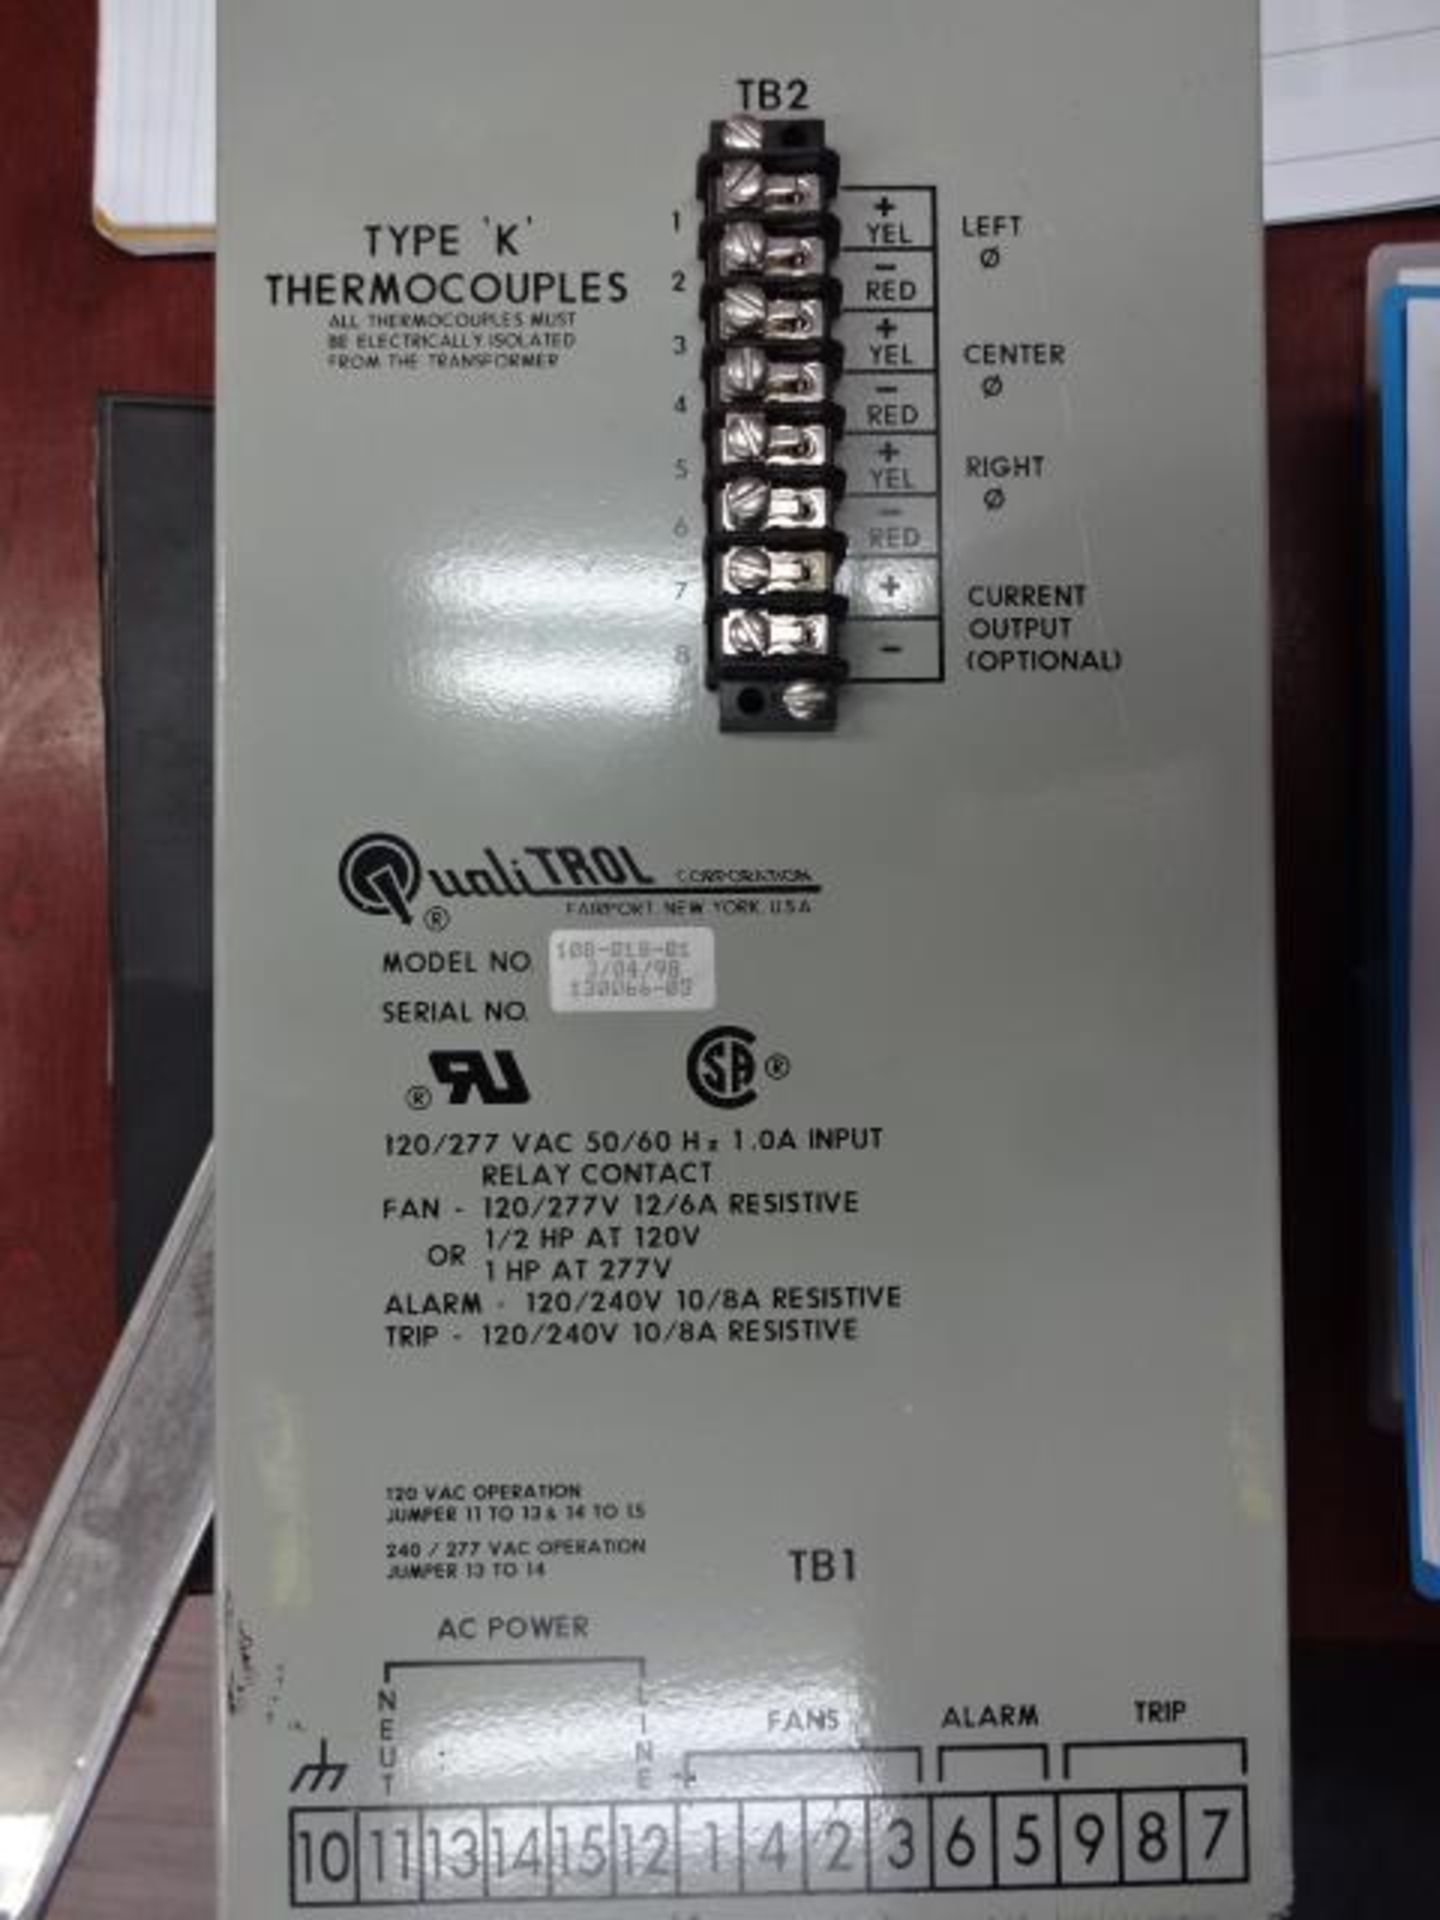 Qualitrol-108-009-01-Electronic-Temperature-Monitor-120-277-Vac - Image 2 of 4